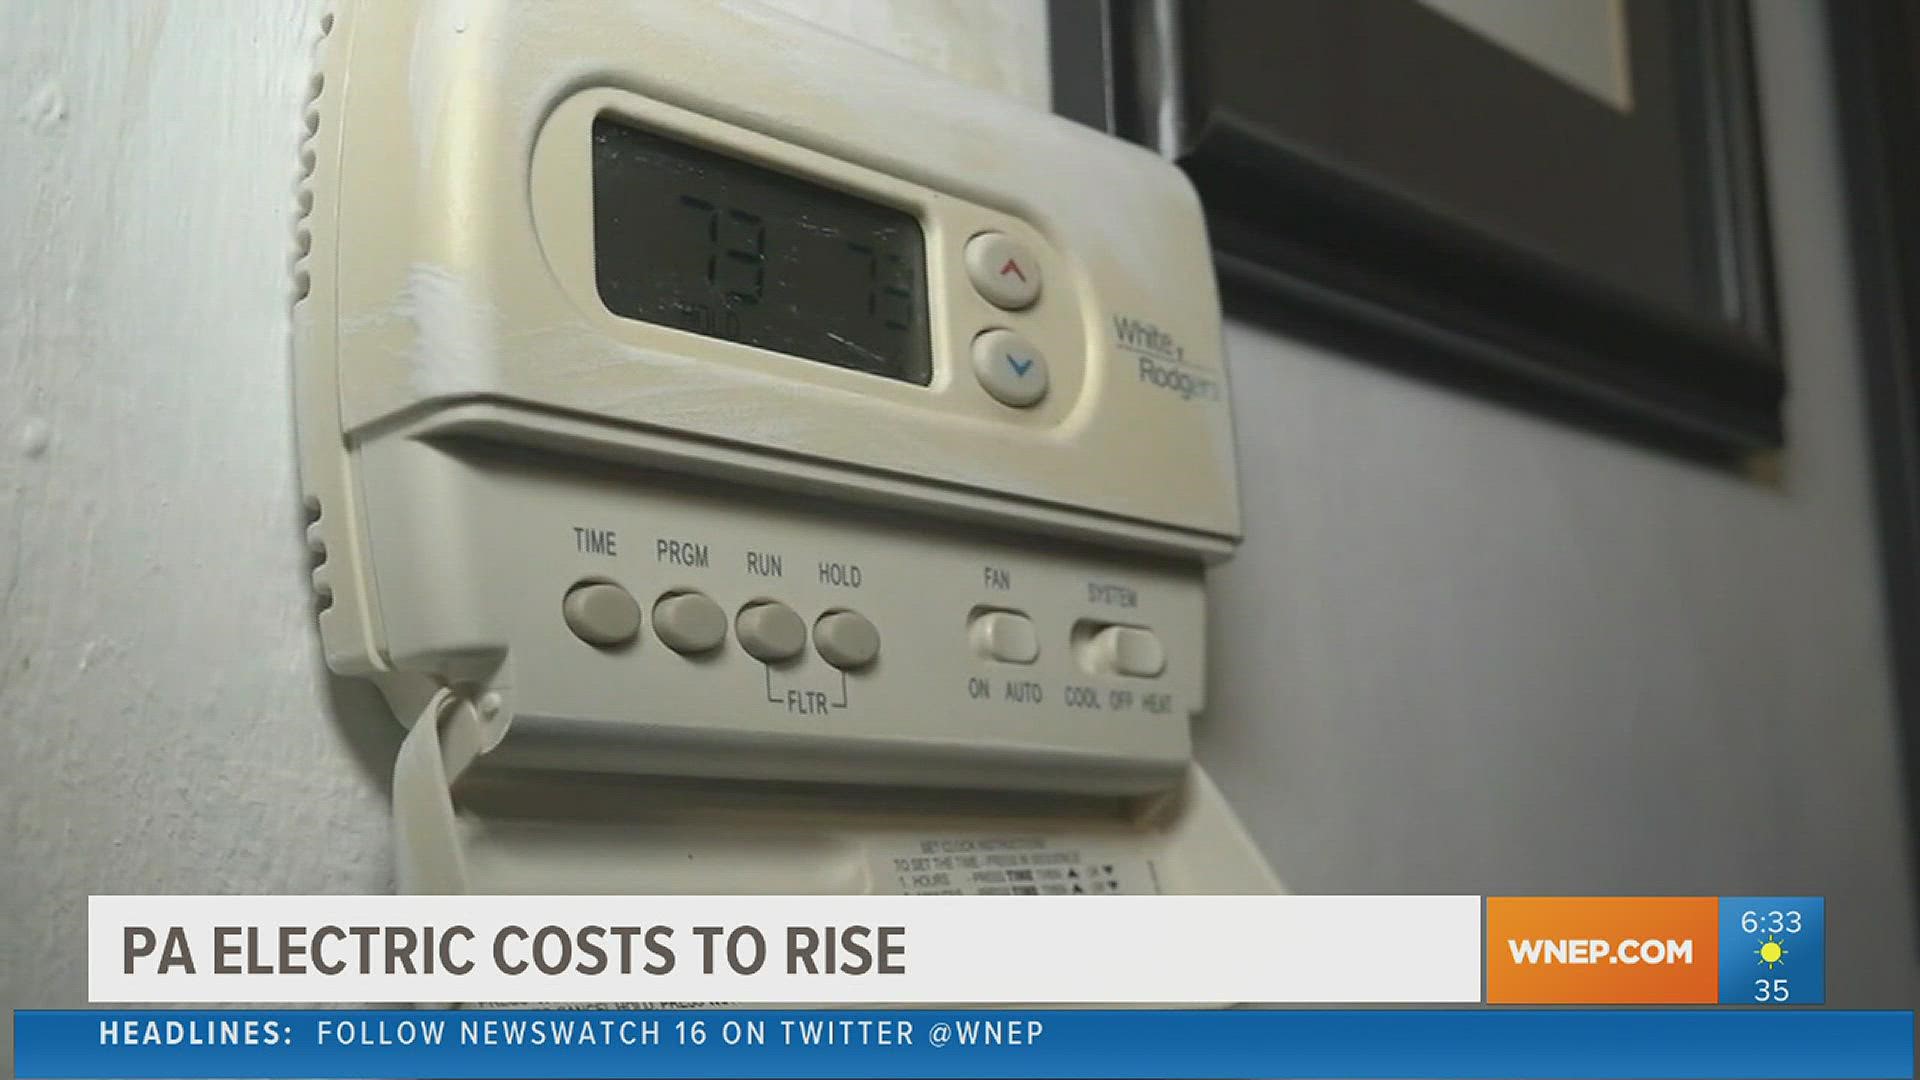 Homeowners across the state will shell out more money to heat their homes this winter.